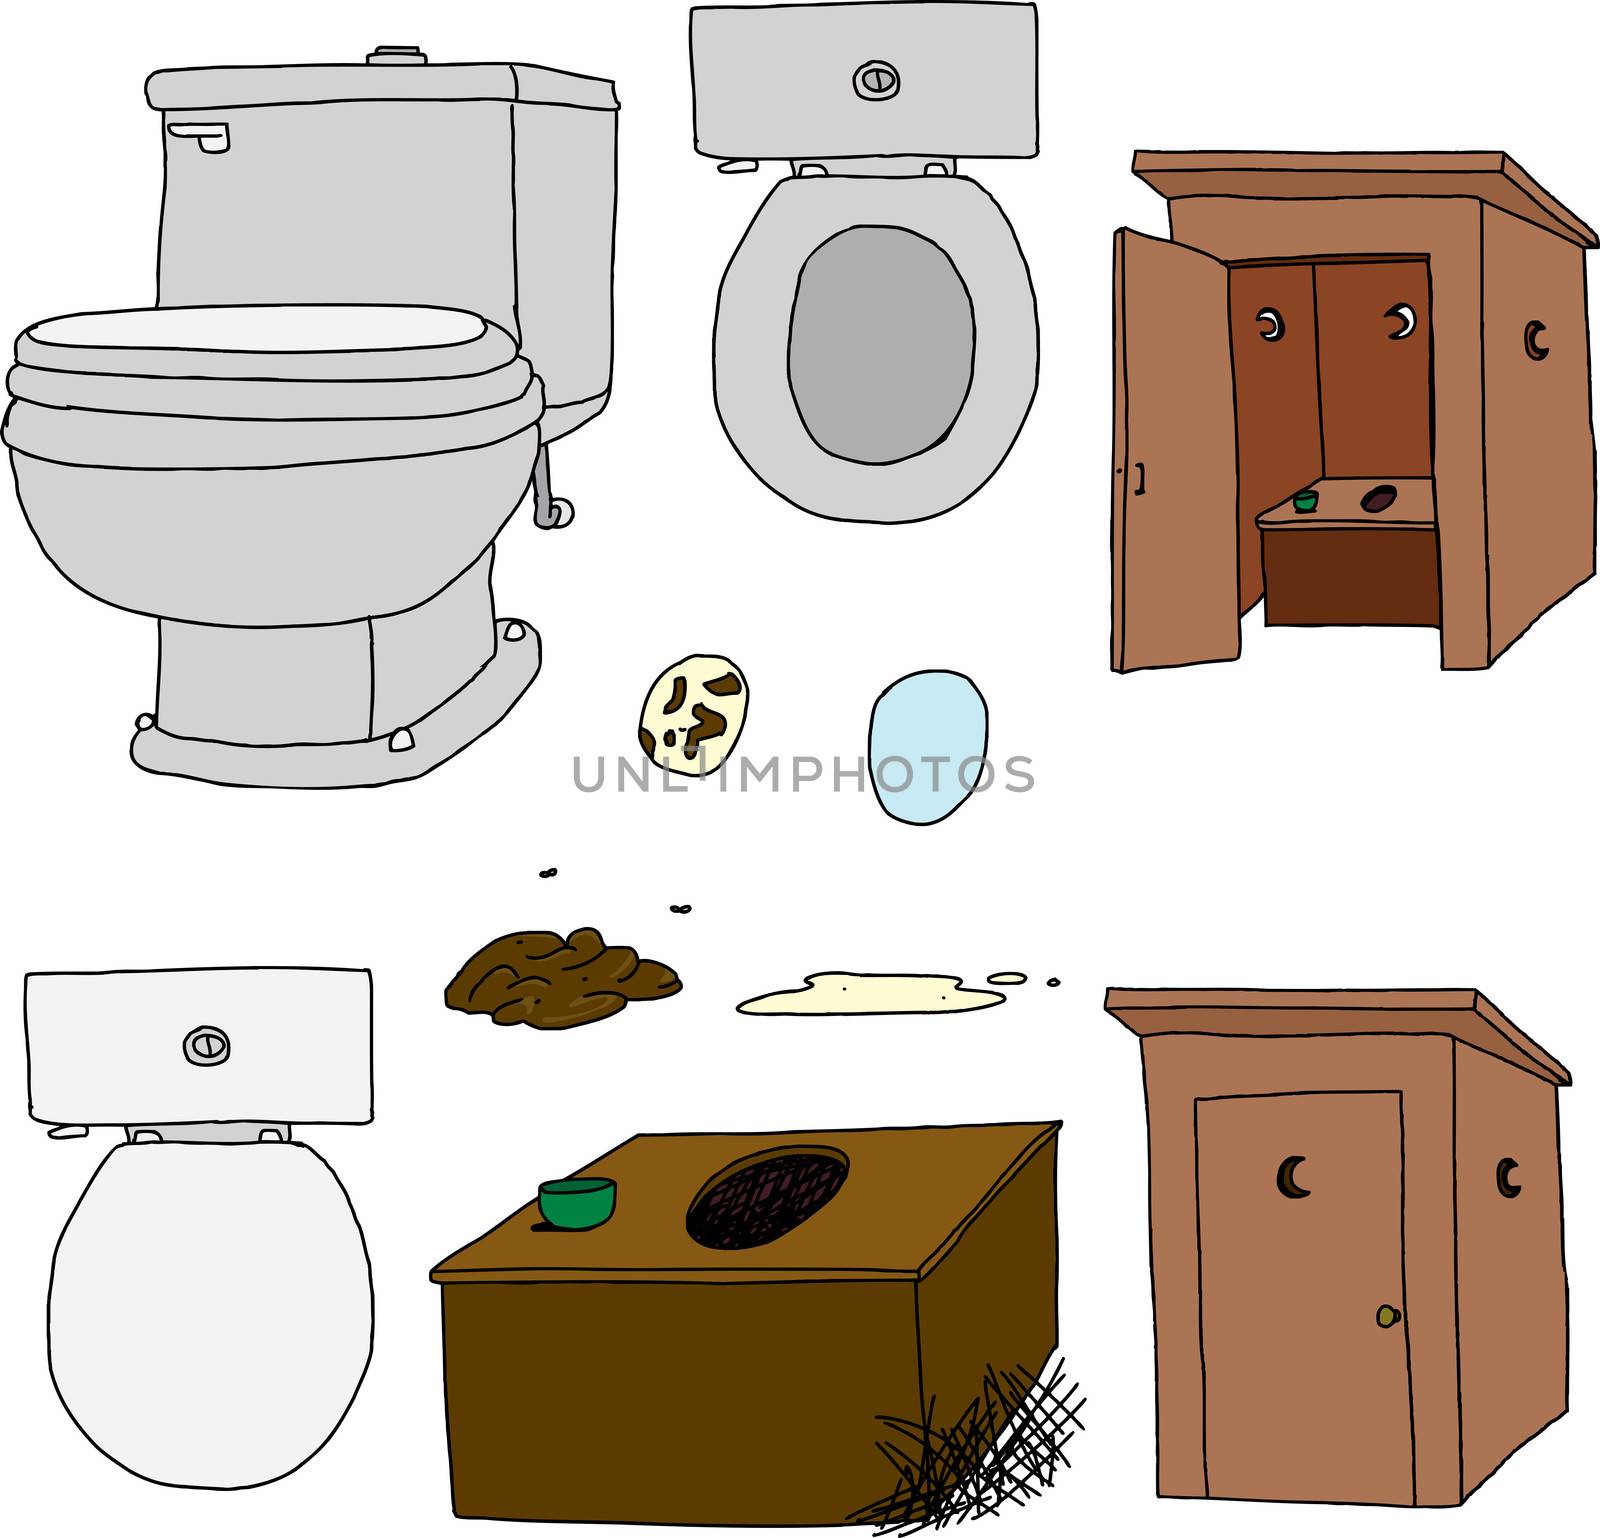 Toilet and outhouse cartoons on isolated background